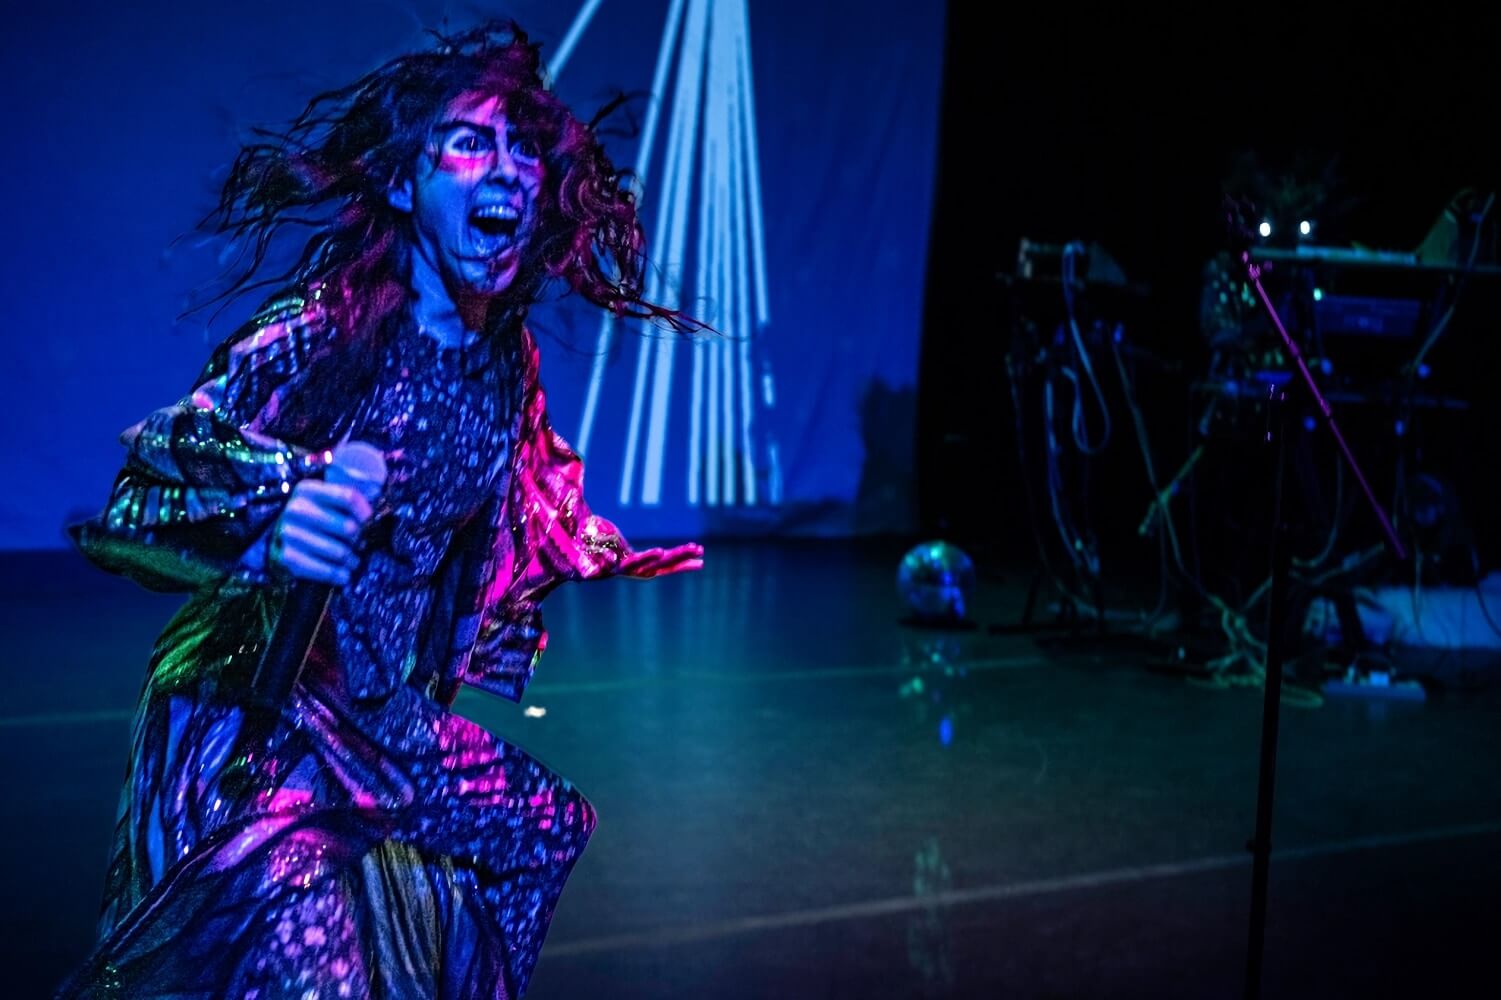 A person wearing a patterned bodysuit and dark reflective jacket crouches in the left foreground and holds a microphone in their right hand. They appear to be yelling or singing, and their long black hair is swinging out as if they've been photographed midway through a large physical movement. They are lit in red and purple. In the far background there is a blue backdrop upon which are projected white stripes that converge at a point just outside the boundaries of the photograph. The stage is otherwise dark, and on the right side in the middle distance you can faintly make out a DJ table with cables and equipment.